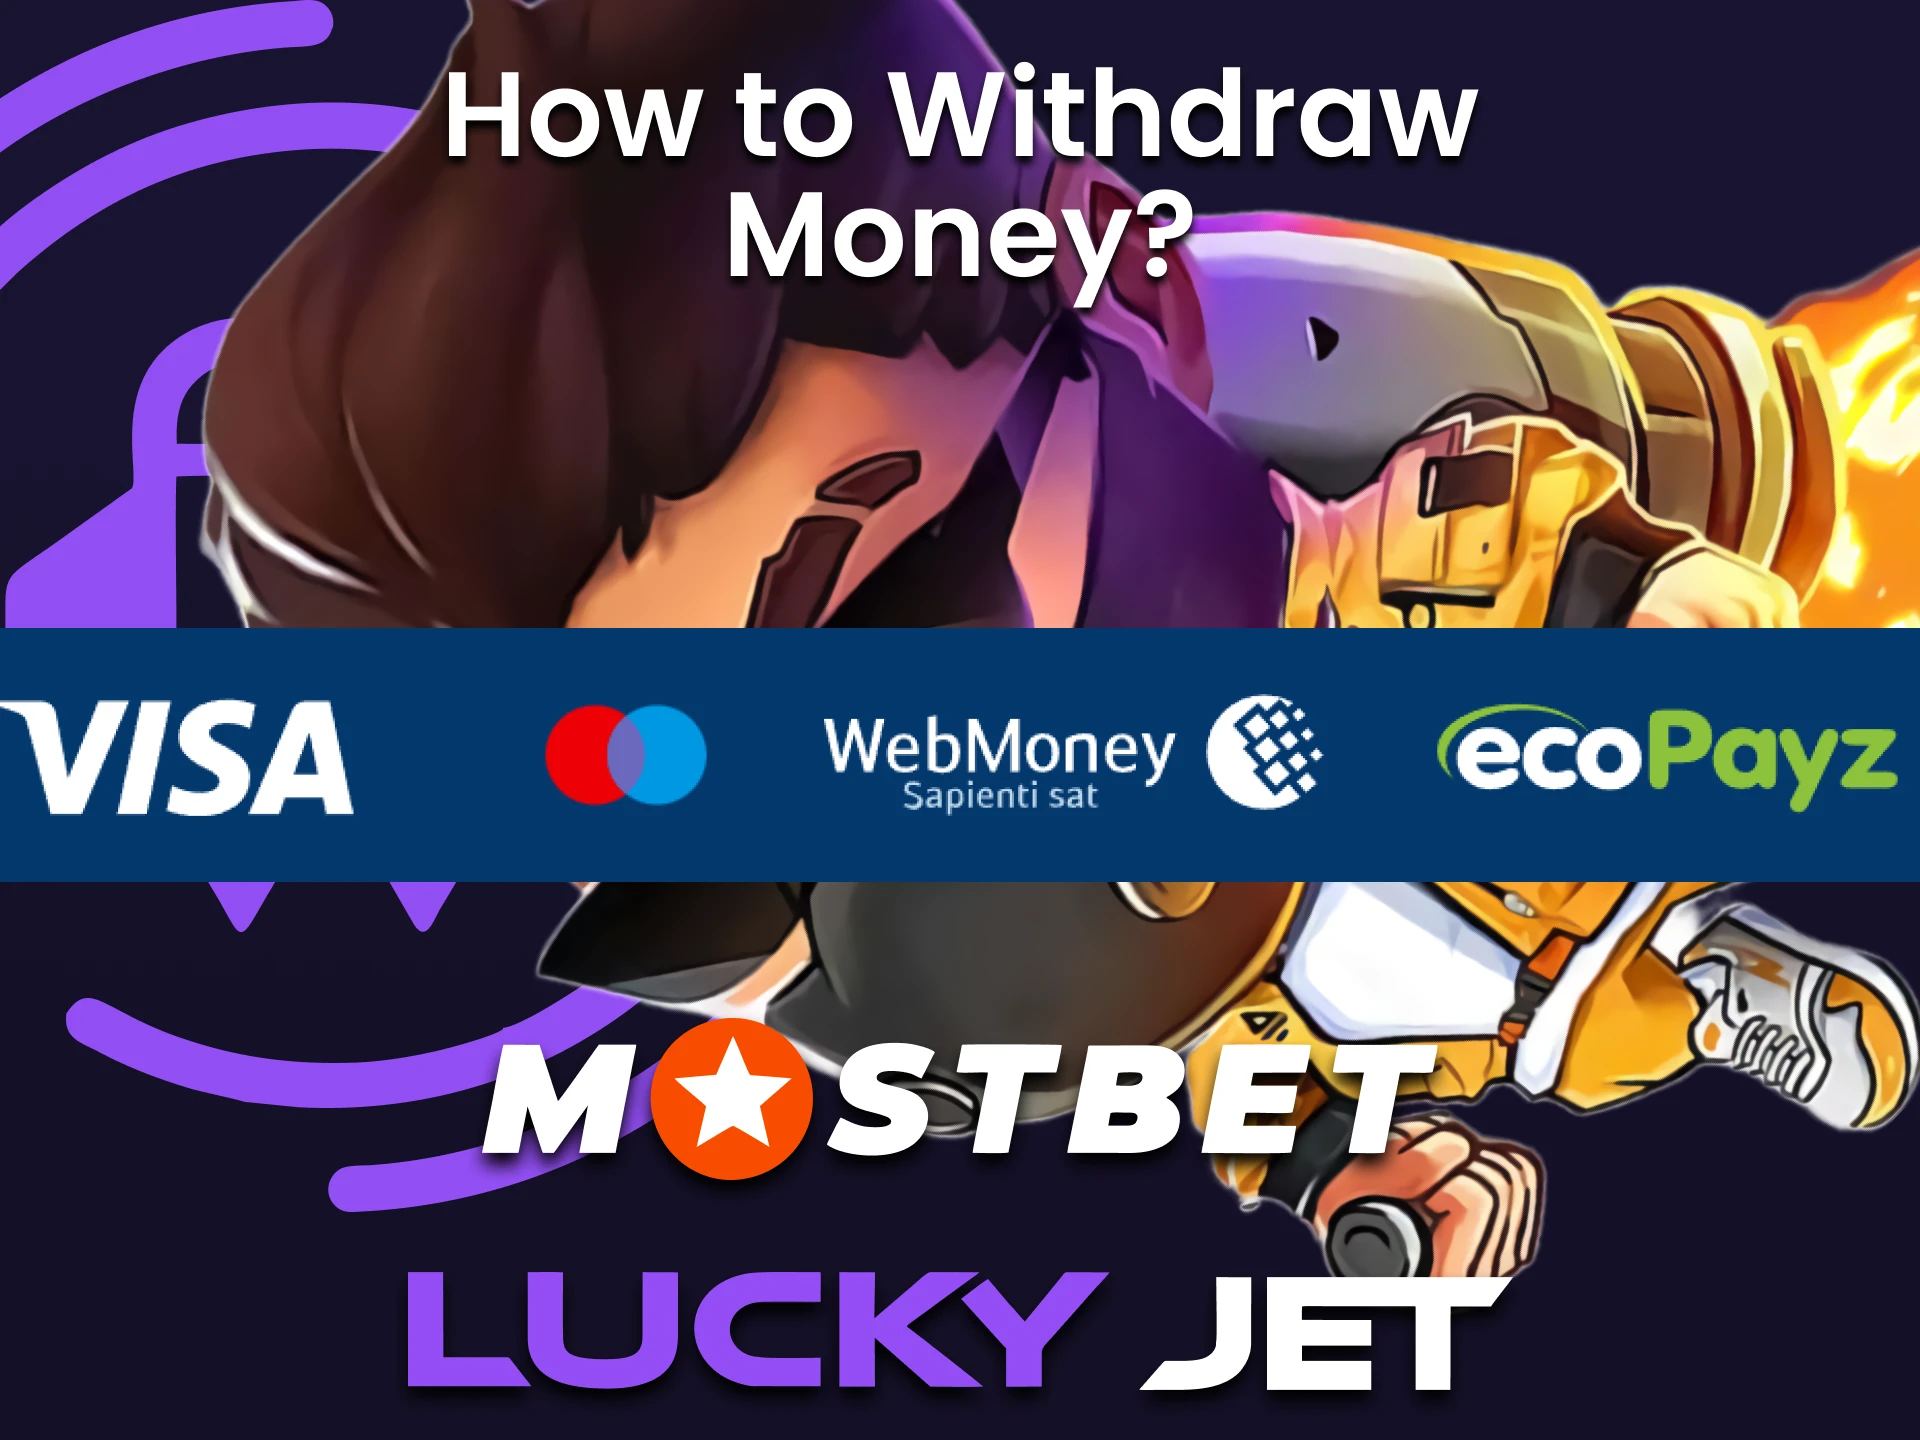 Find out how to withdraw funds for Lucky Jet on Mostbet.